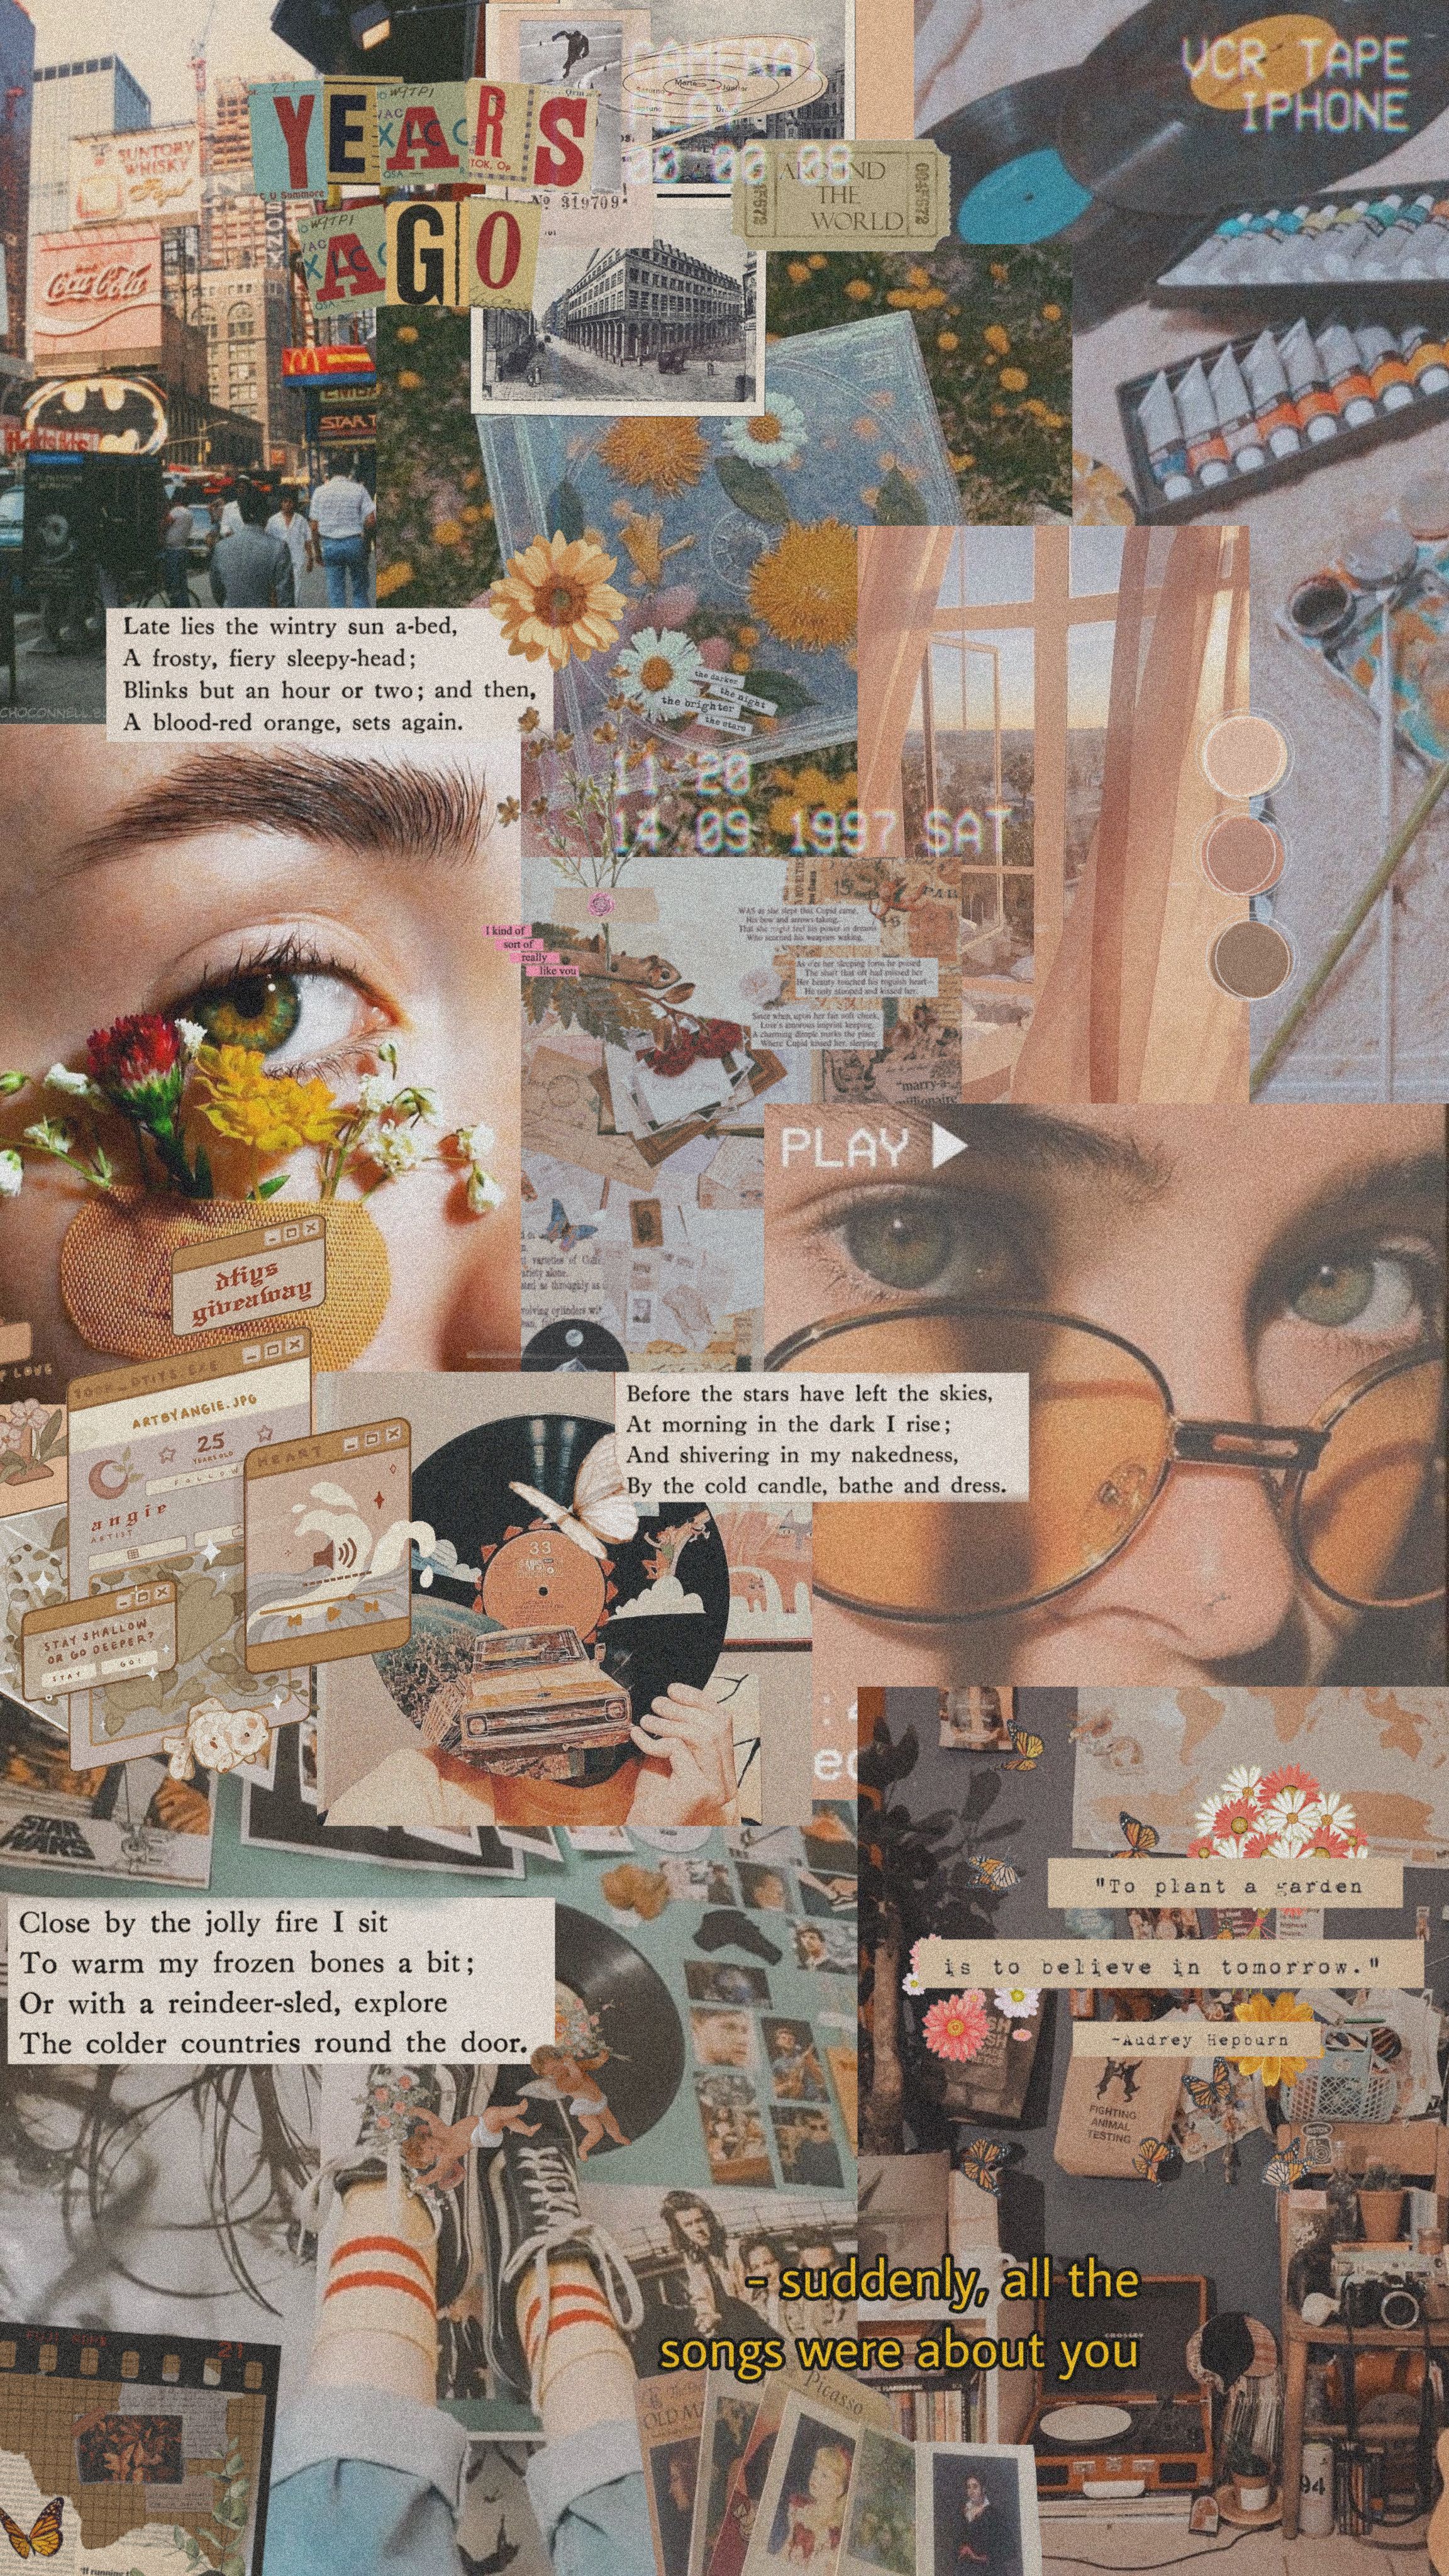 Aesthetic collage background with old photos, books, and a girl with glasses - Retro